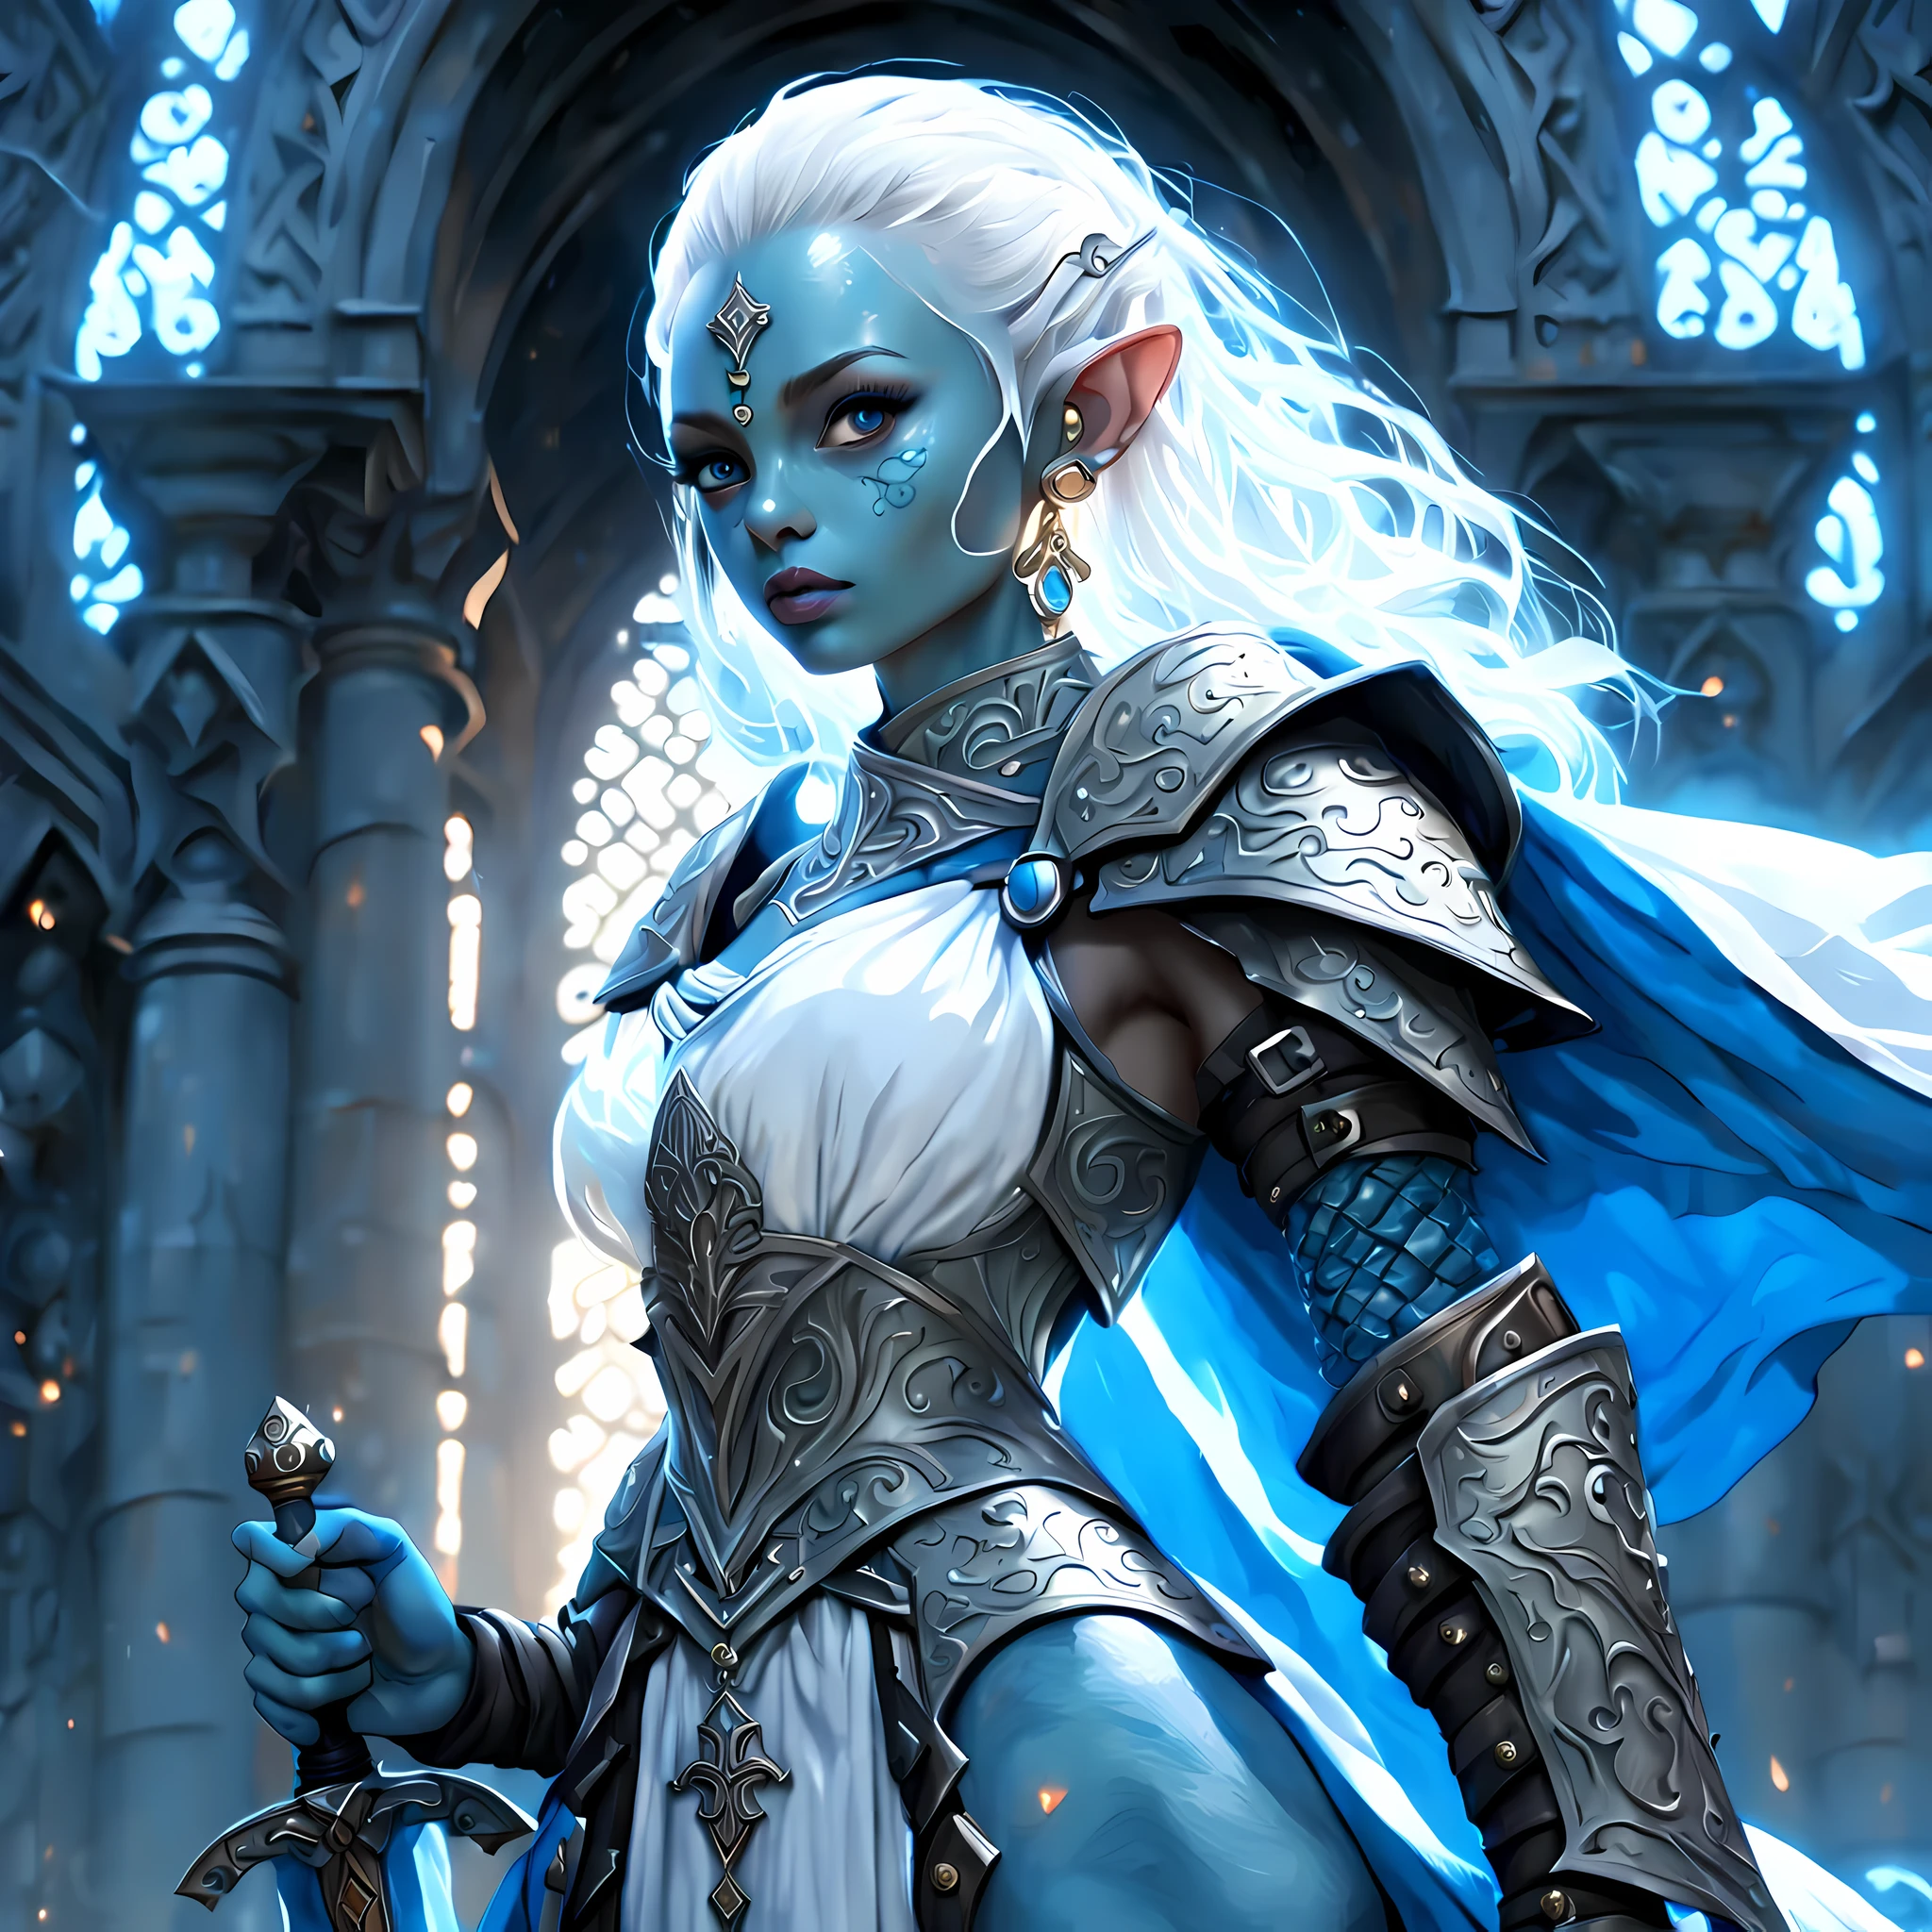 fantasy art, dnd art, RPG art, wide shot, (masterpiece: 1.4) a (portrait: 1.3) intense details, highly detailed, photorealistic, best quality, highres, portrait a female (fantasy art, Masterpiece, best quality: 1.3) ((blue skin: 1.5)), intense details facial details, exquisite beauty, (fantasy art, Masterpiece, best quality) cleric, (blue: 1.3) skinned female, (white hair: 1.3), bald head (green: 1.3) eye, fantasy art, Masterpiece, best quality) armed a fiery sword red fire, wearing heavy (white: 1.3) half plate mail armor, wearing high heeled laced boots, wearing an(orange :1.3) cloak, wearing glowing holy symbol GlowingRunes_yellow, within fantasy temple background, reflection light, high details, best quality, 16k, [ultra detailed], masterpiece, best quality, (extremely detailed), close up, ultra wide shot, photorealistic, RAW, fantasy art, dnd art, fantasy art, realistic art,((best quality)), ((masterpiece)), (detailed), perfect face, ((no ears: 1.6))